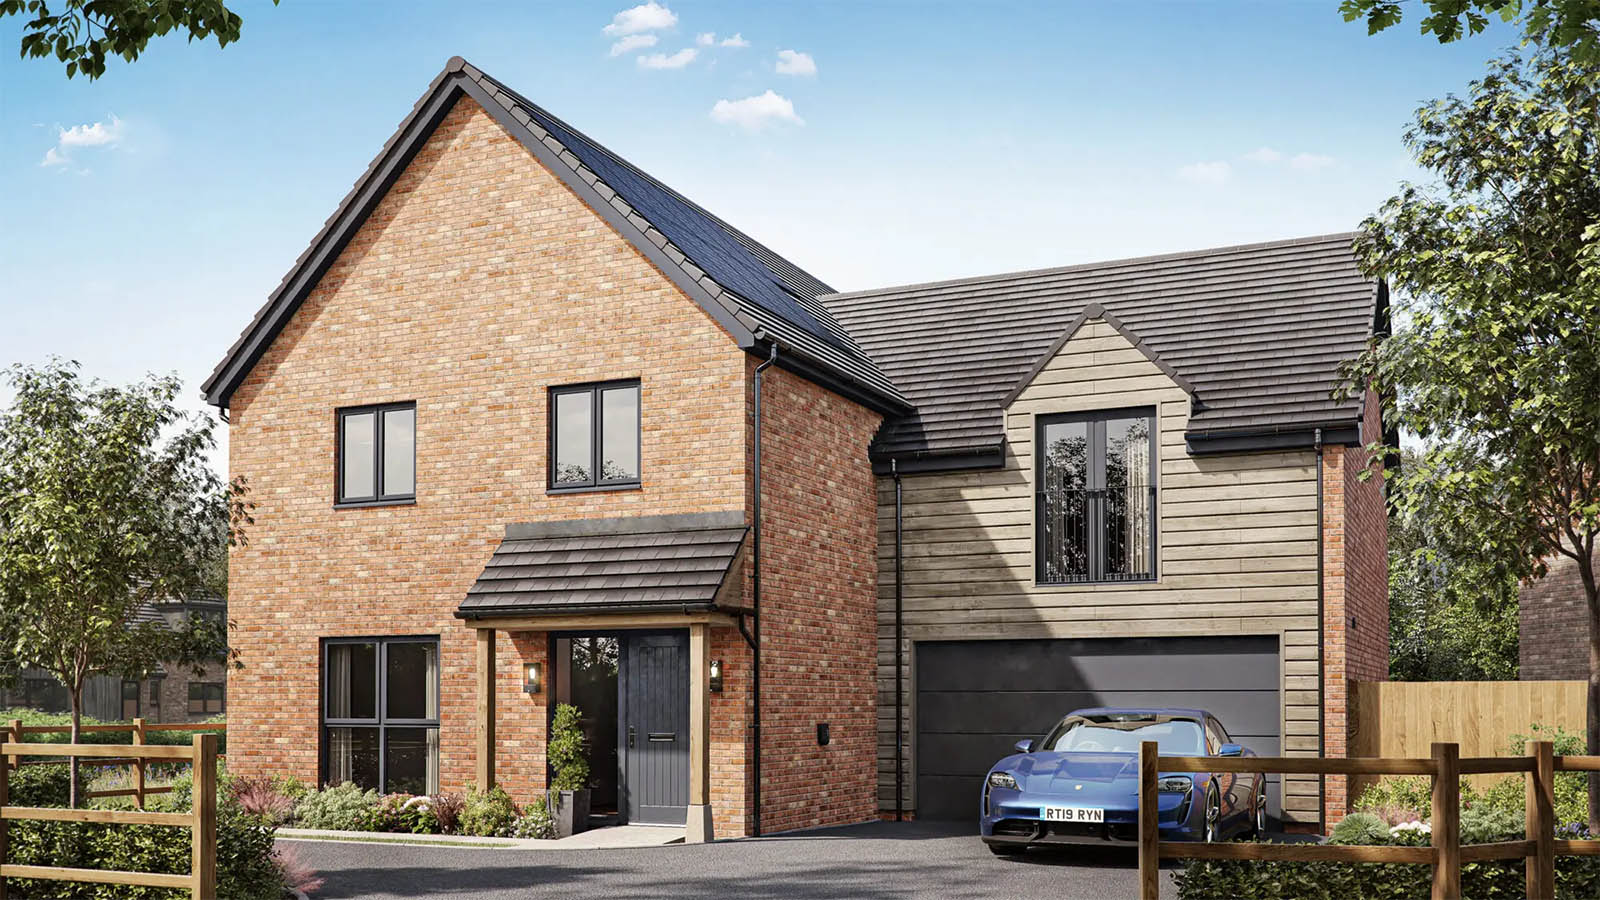 The ‘Prestleigh’ from Newland Homes at Pear Trees